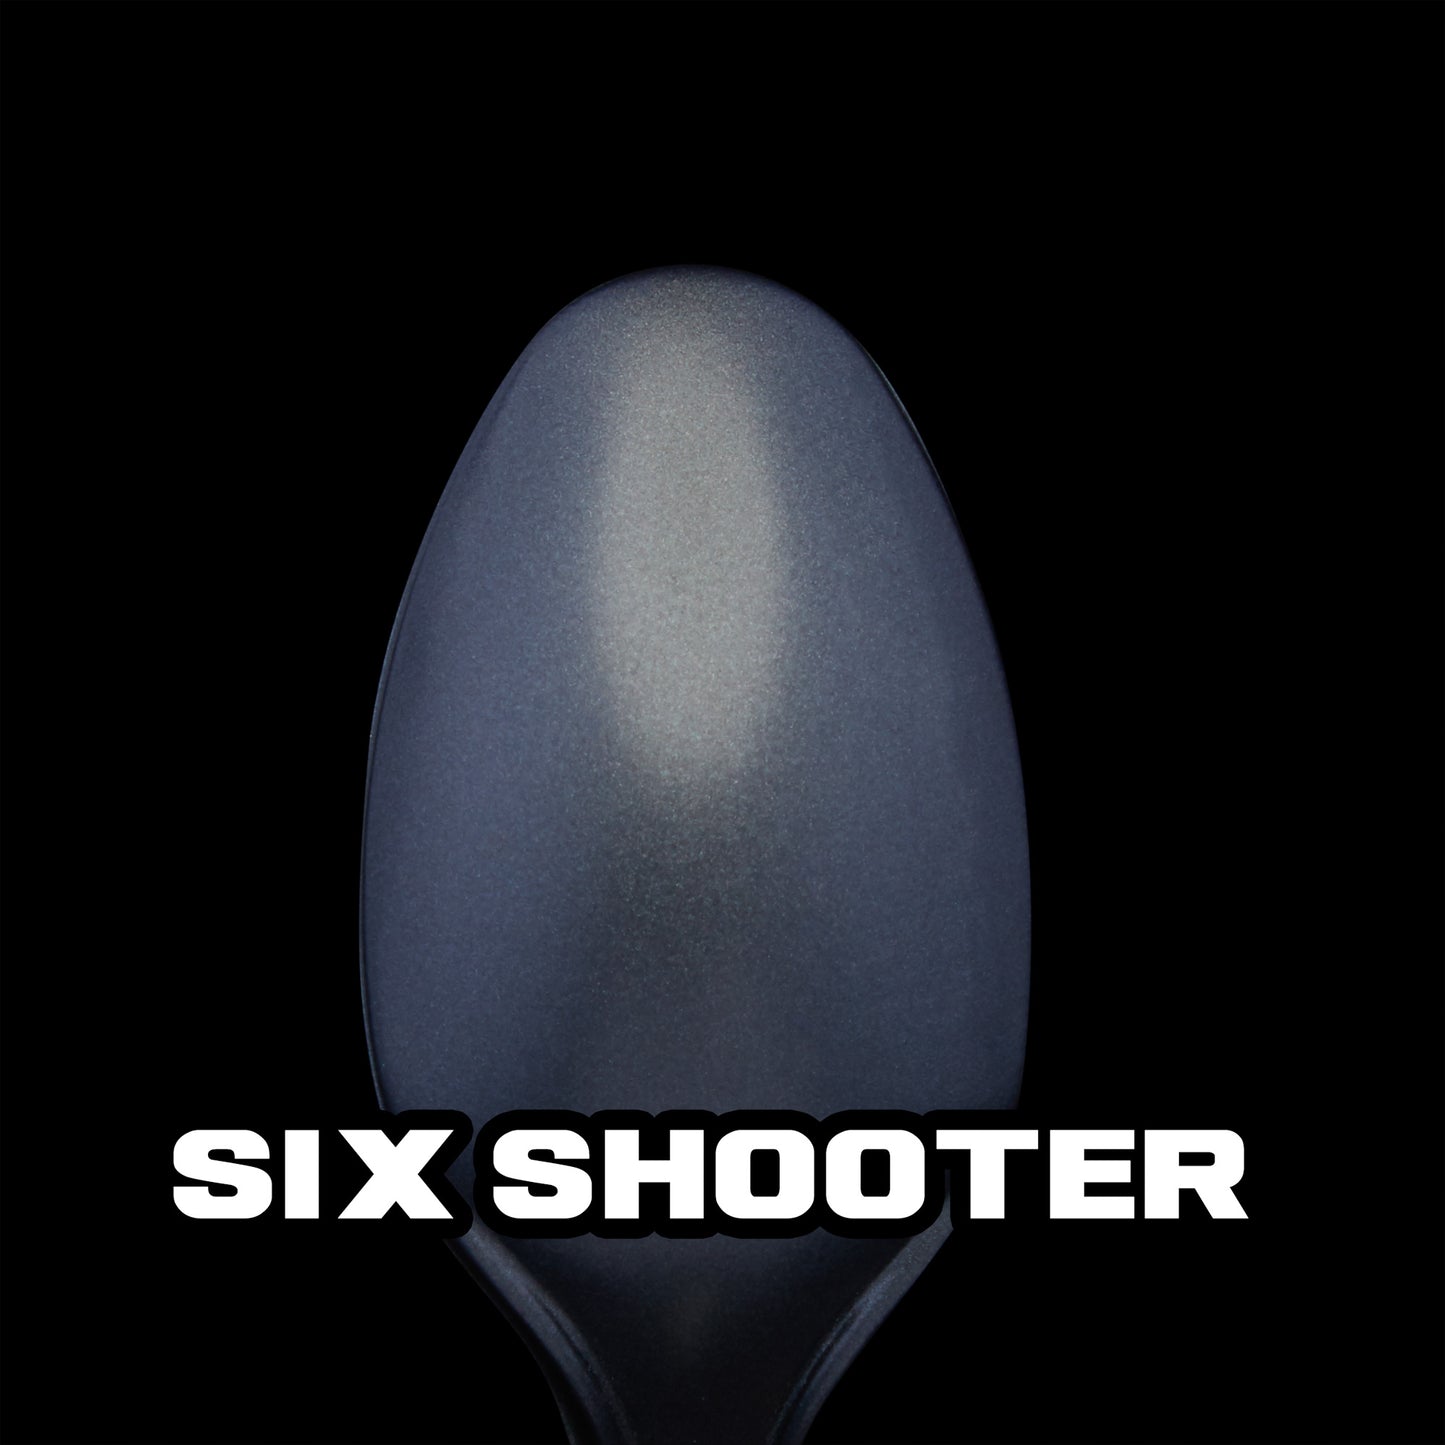 spoon with dark silver metallic paint (Six Shooter)